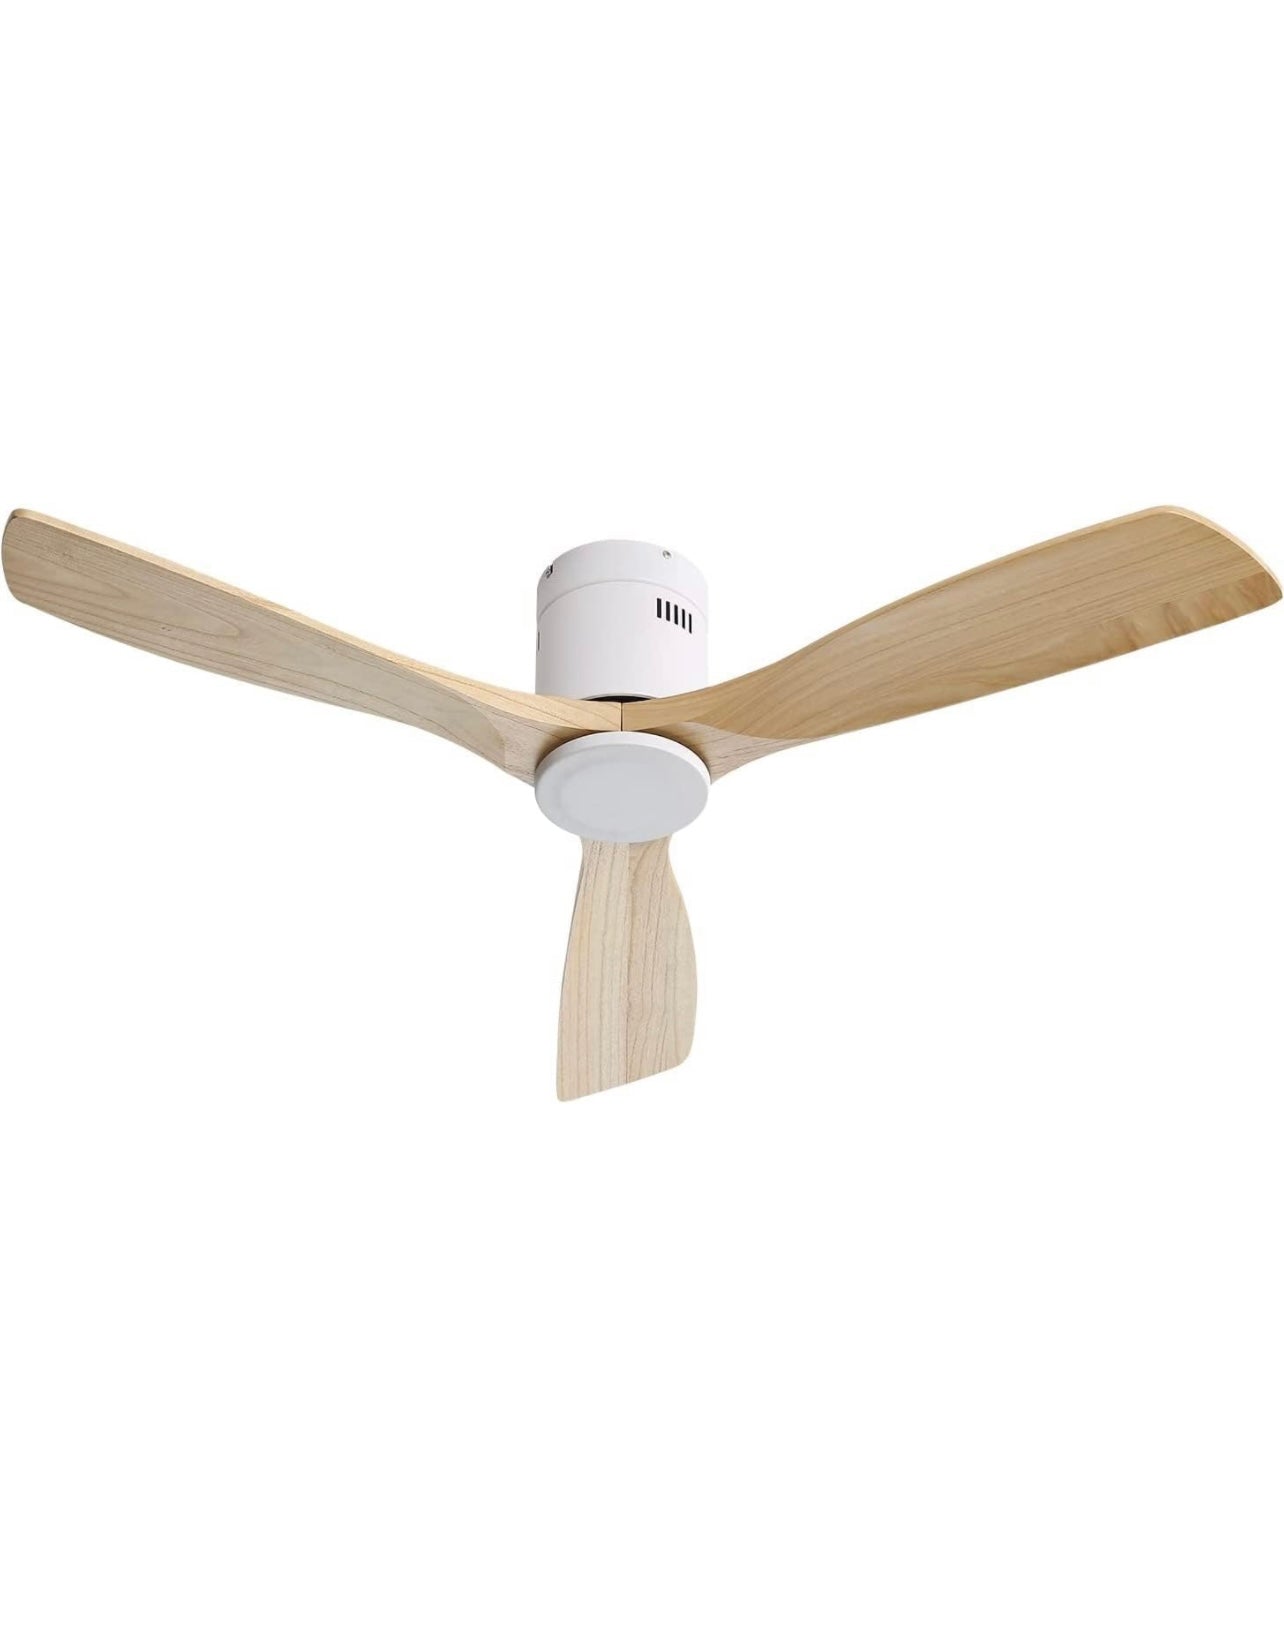 CACI Mall 52 Inch Low Profile Ceiling Fan No Light Wood Fan Blades Flush Mount Ceiling Fan Noiseless Reversible DC Motor Remote Control Without Light (White)